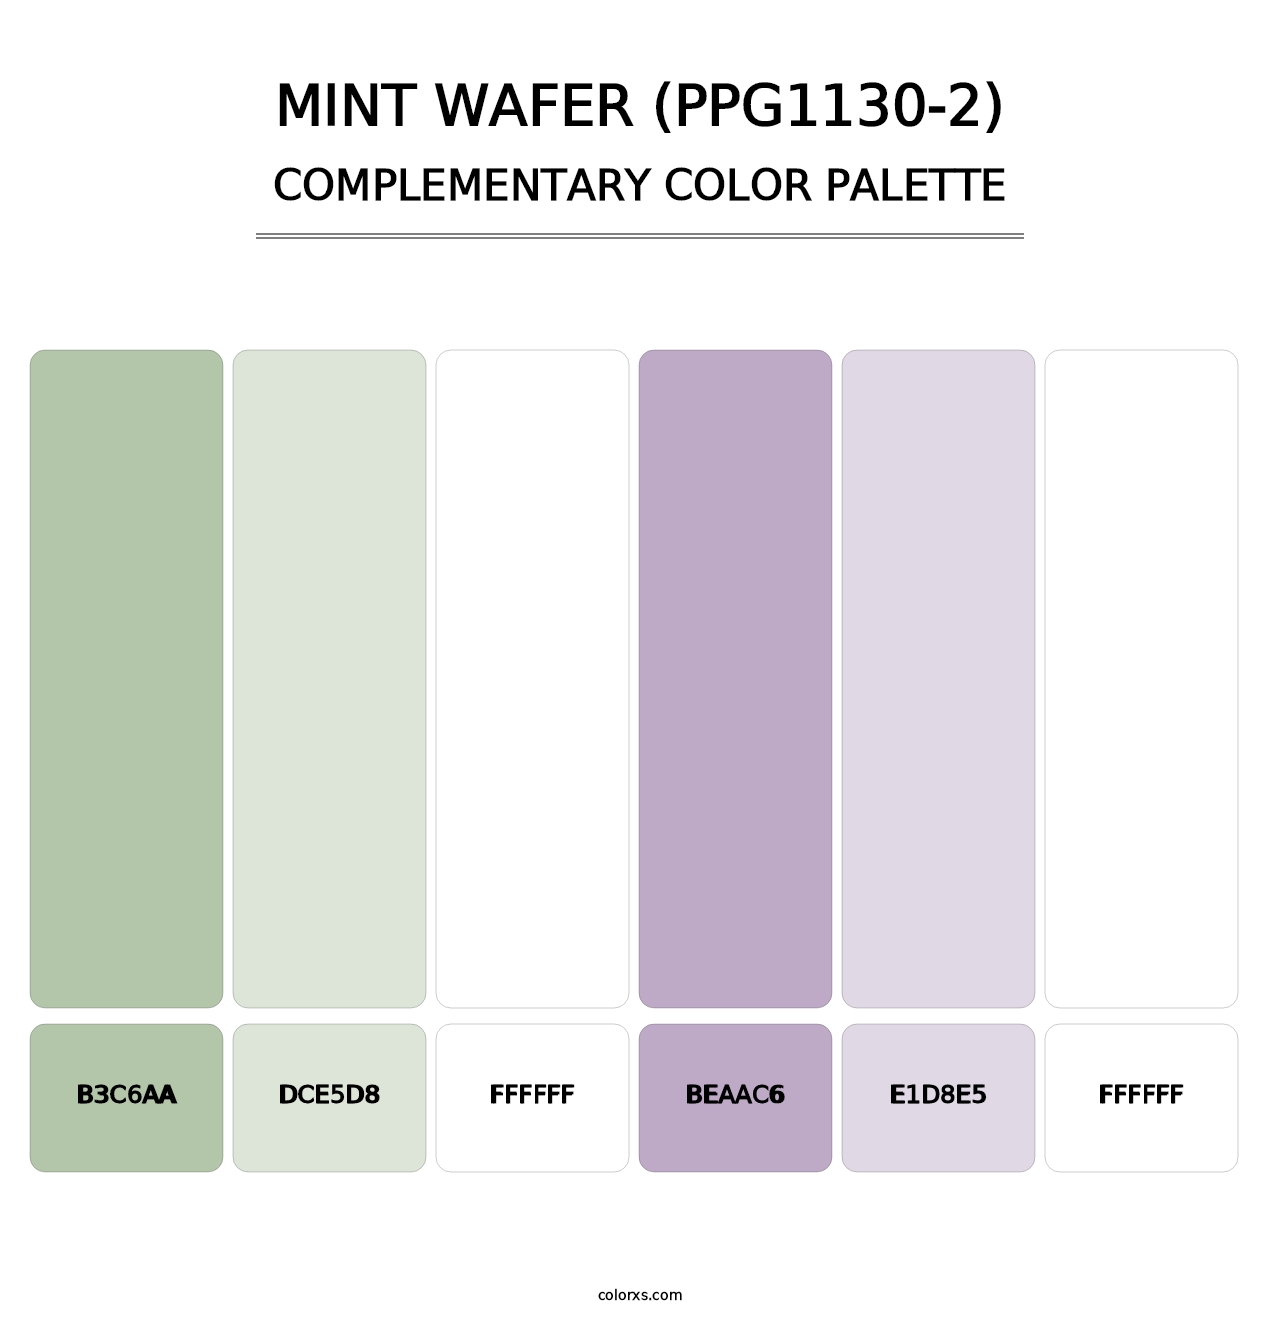 Mint Wafer (PPG1130-2) - Complementary Color Palette